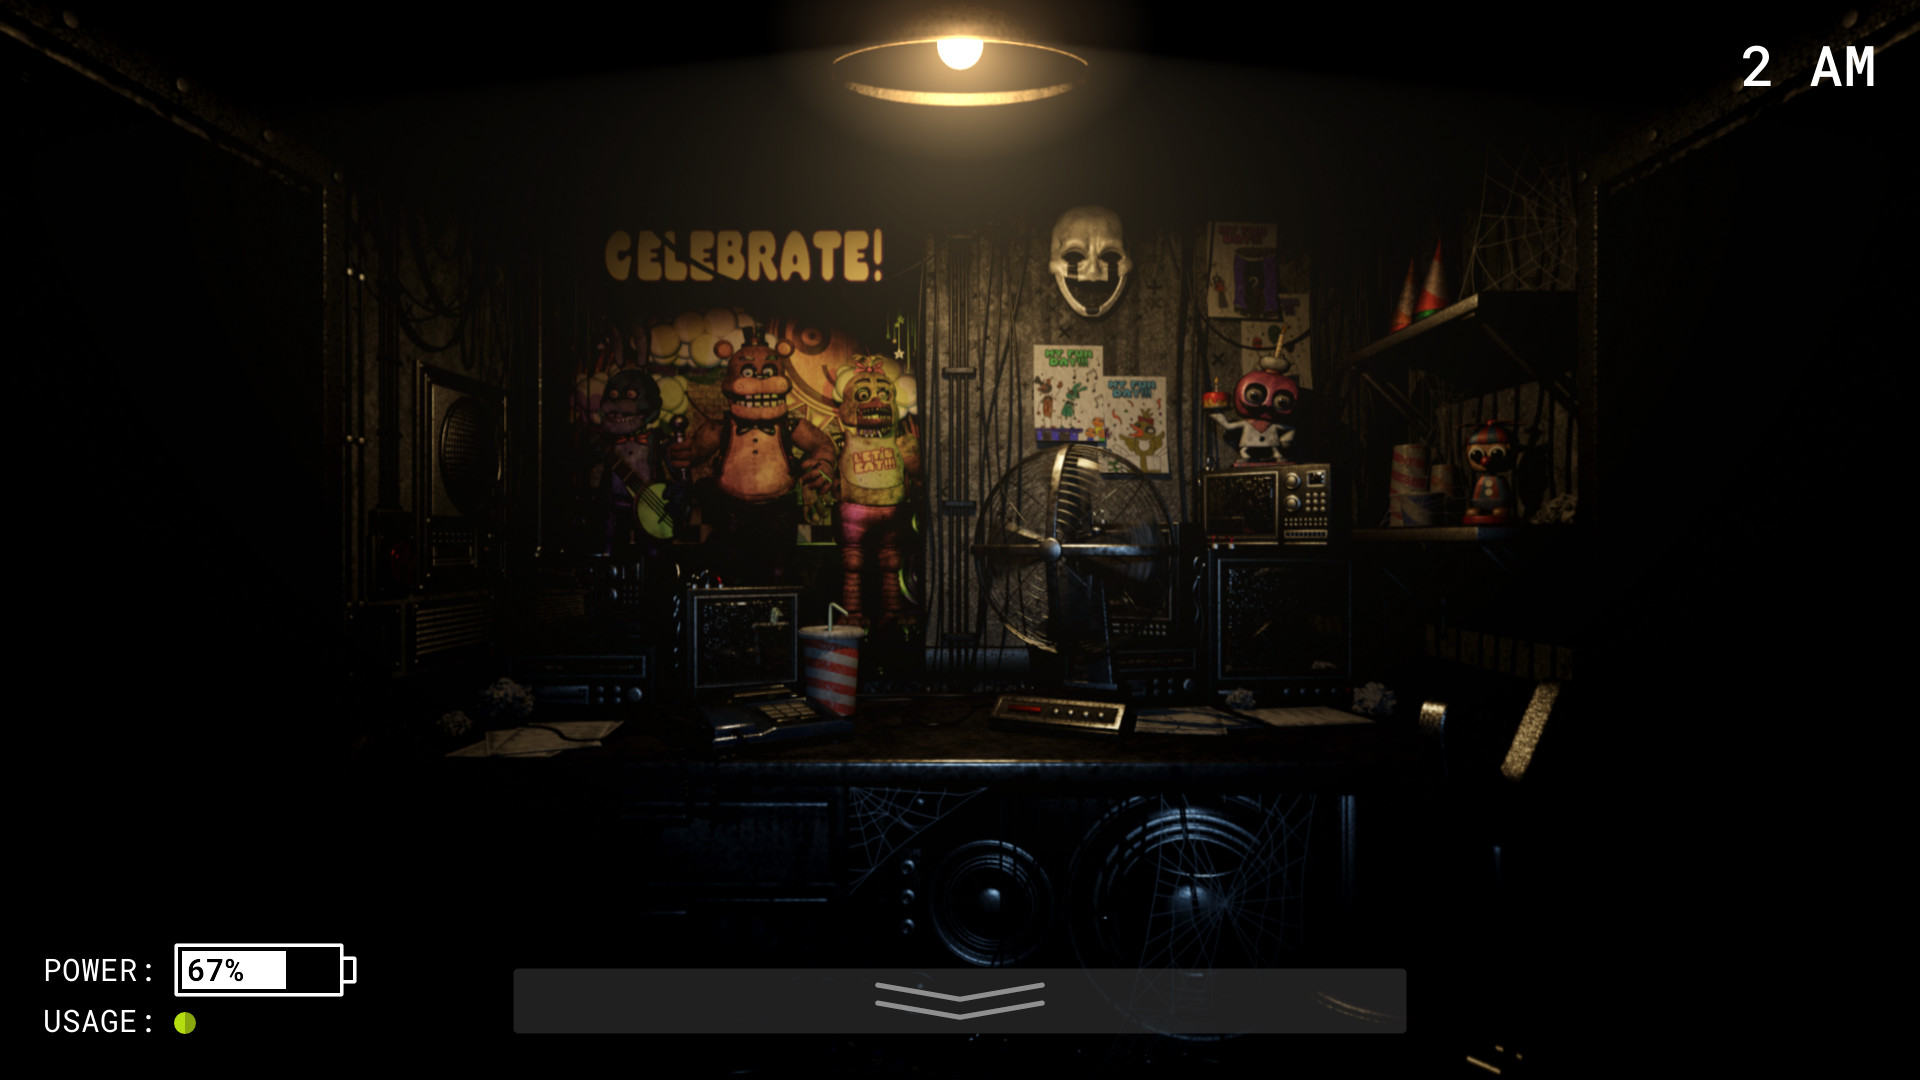 Five Nights At Freddy's 4 Released Early on Steam